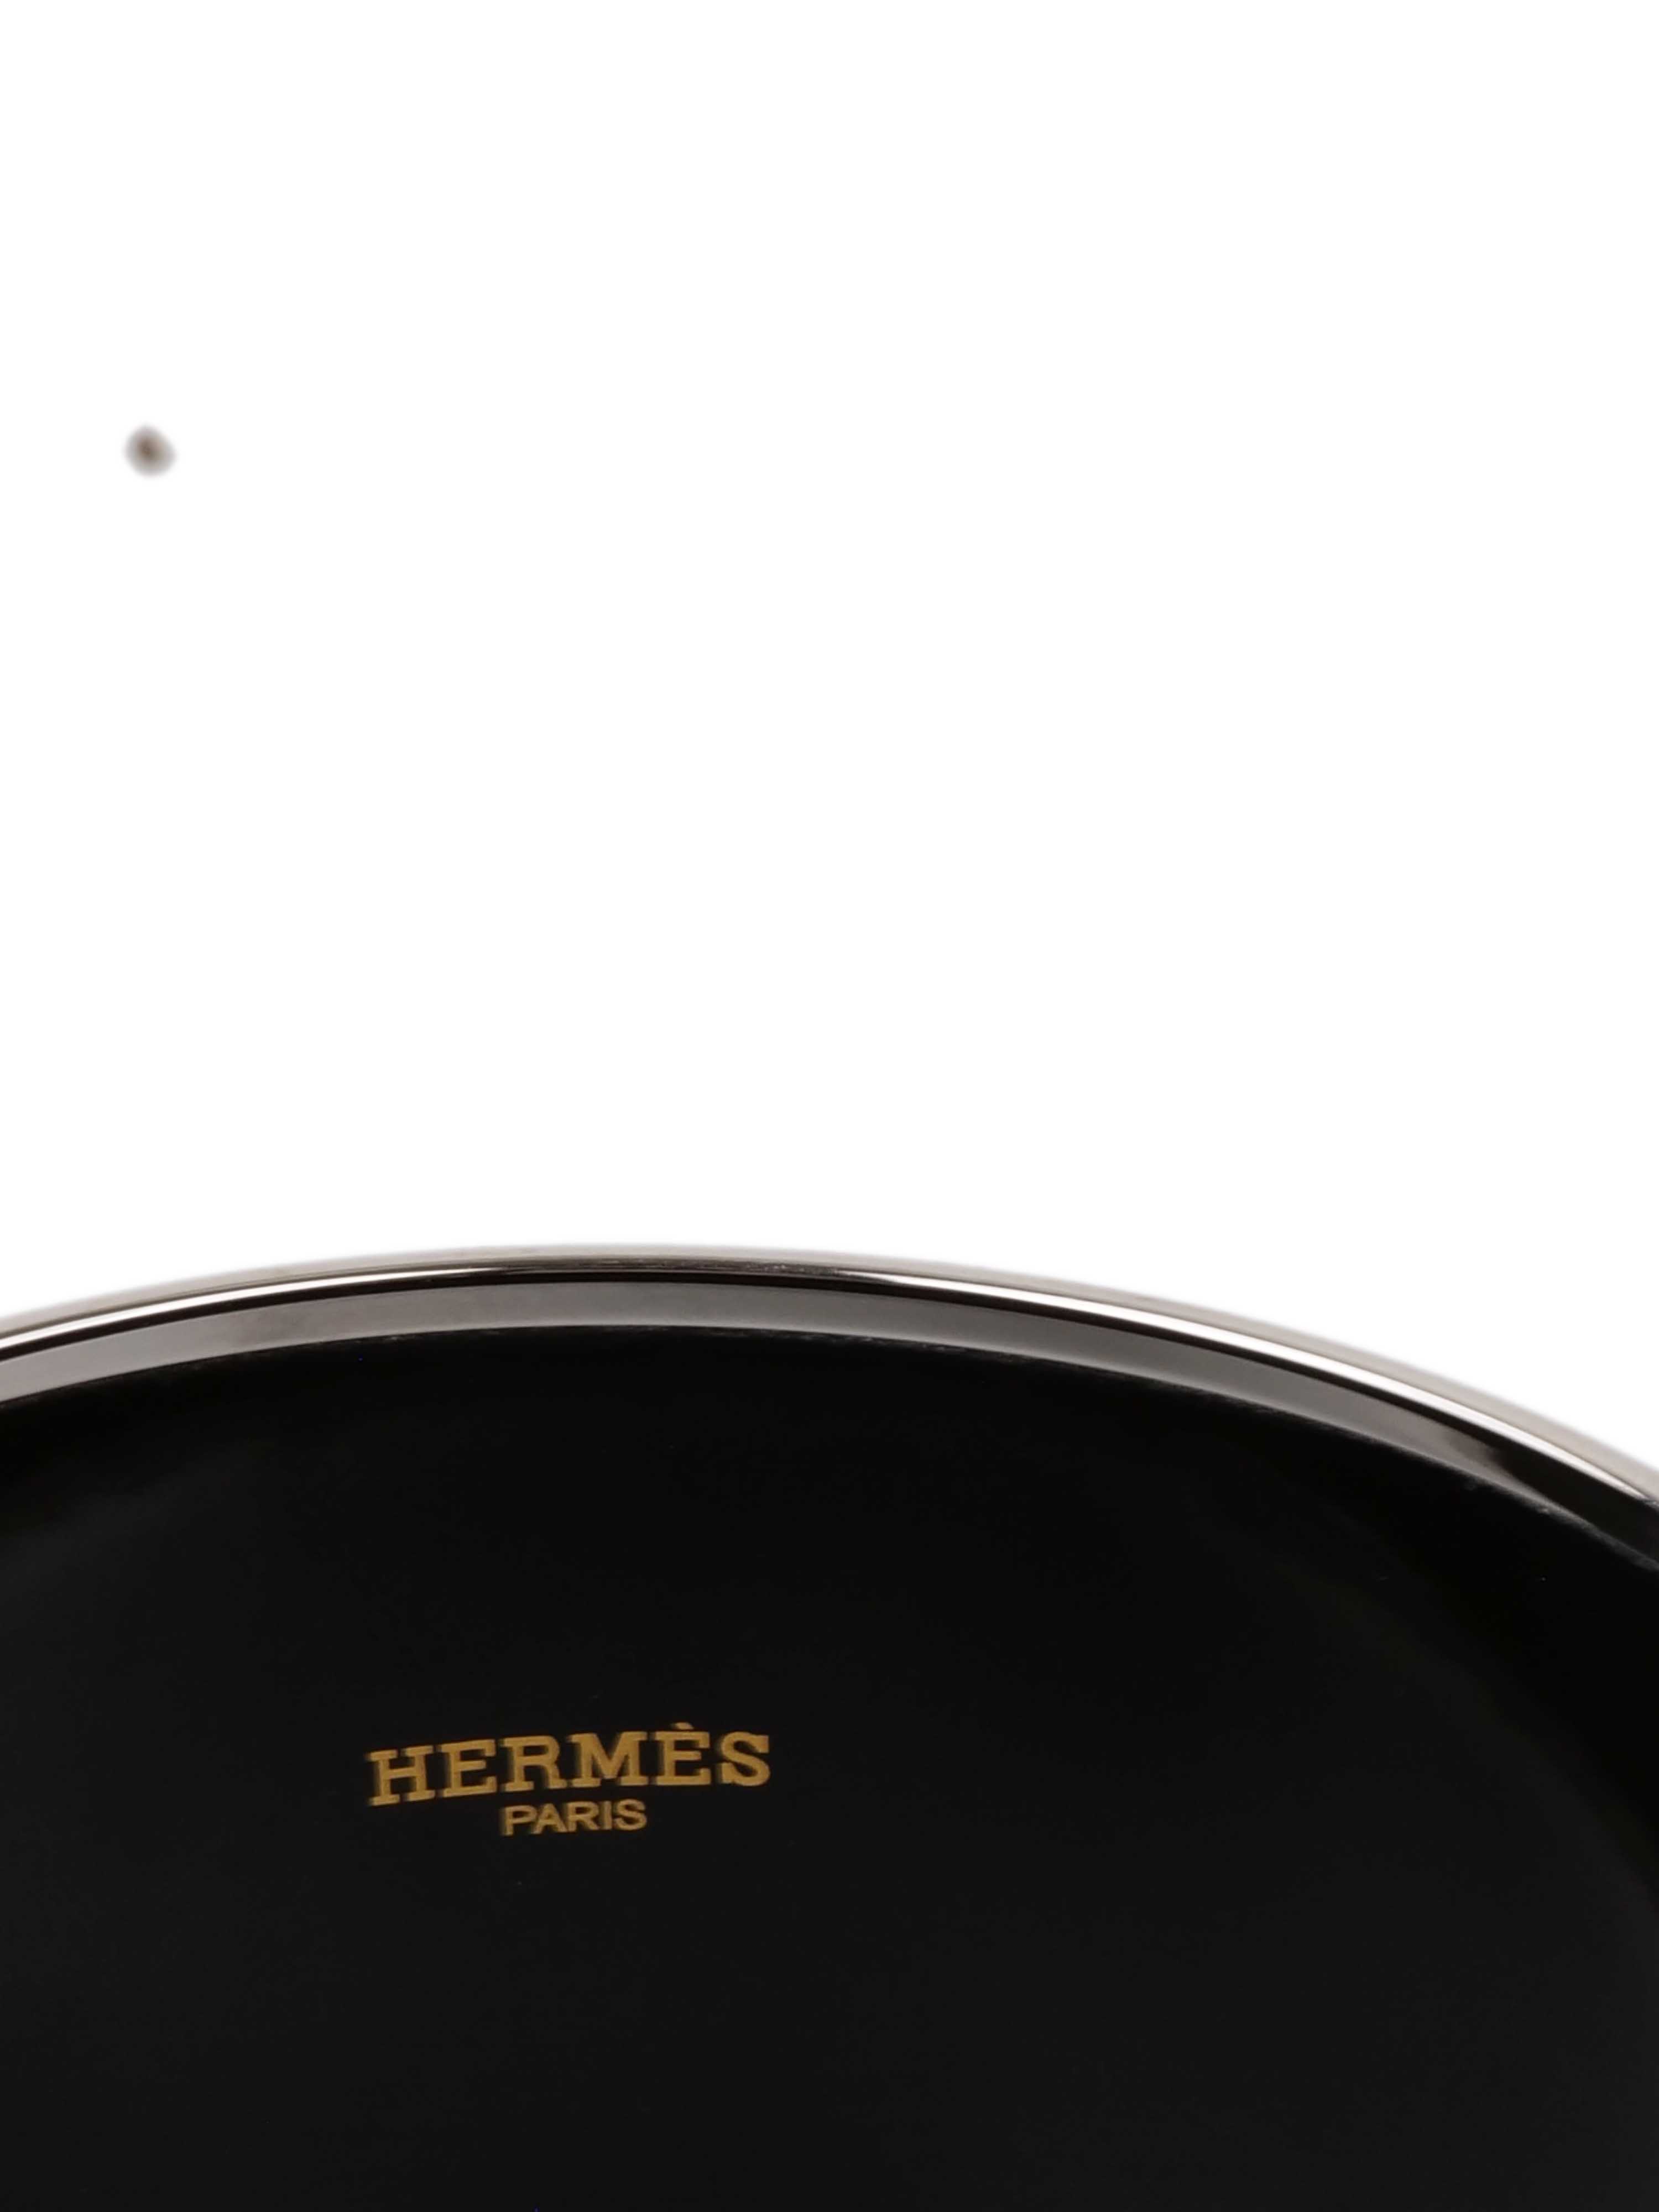 Hermes Black with Horse Design Extra Wide Bangle.